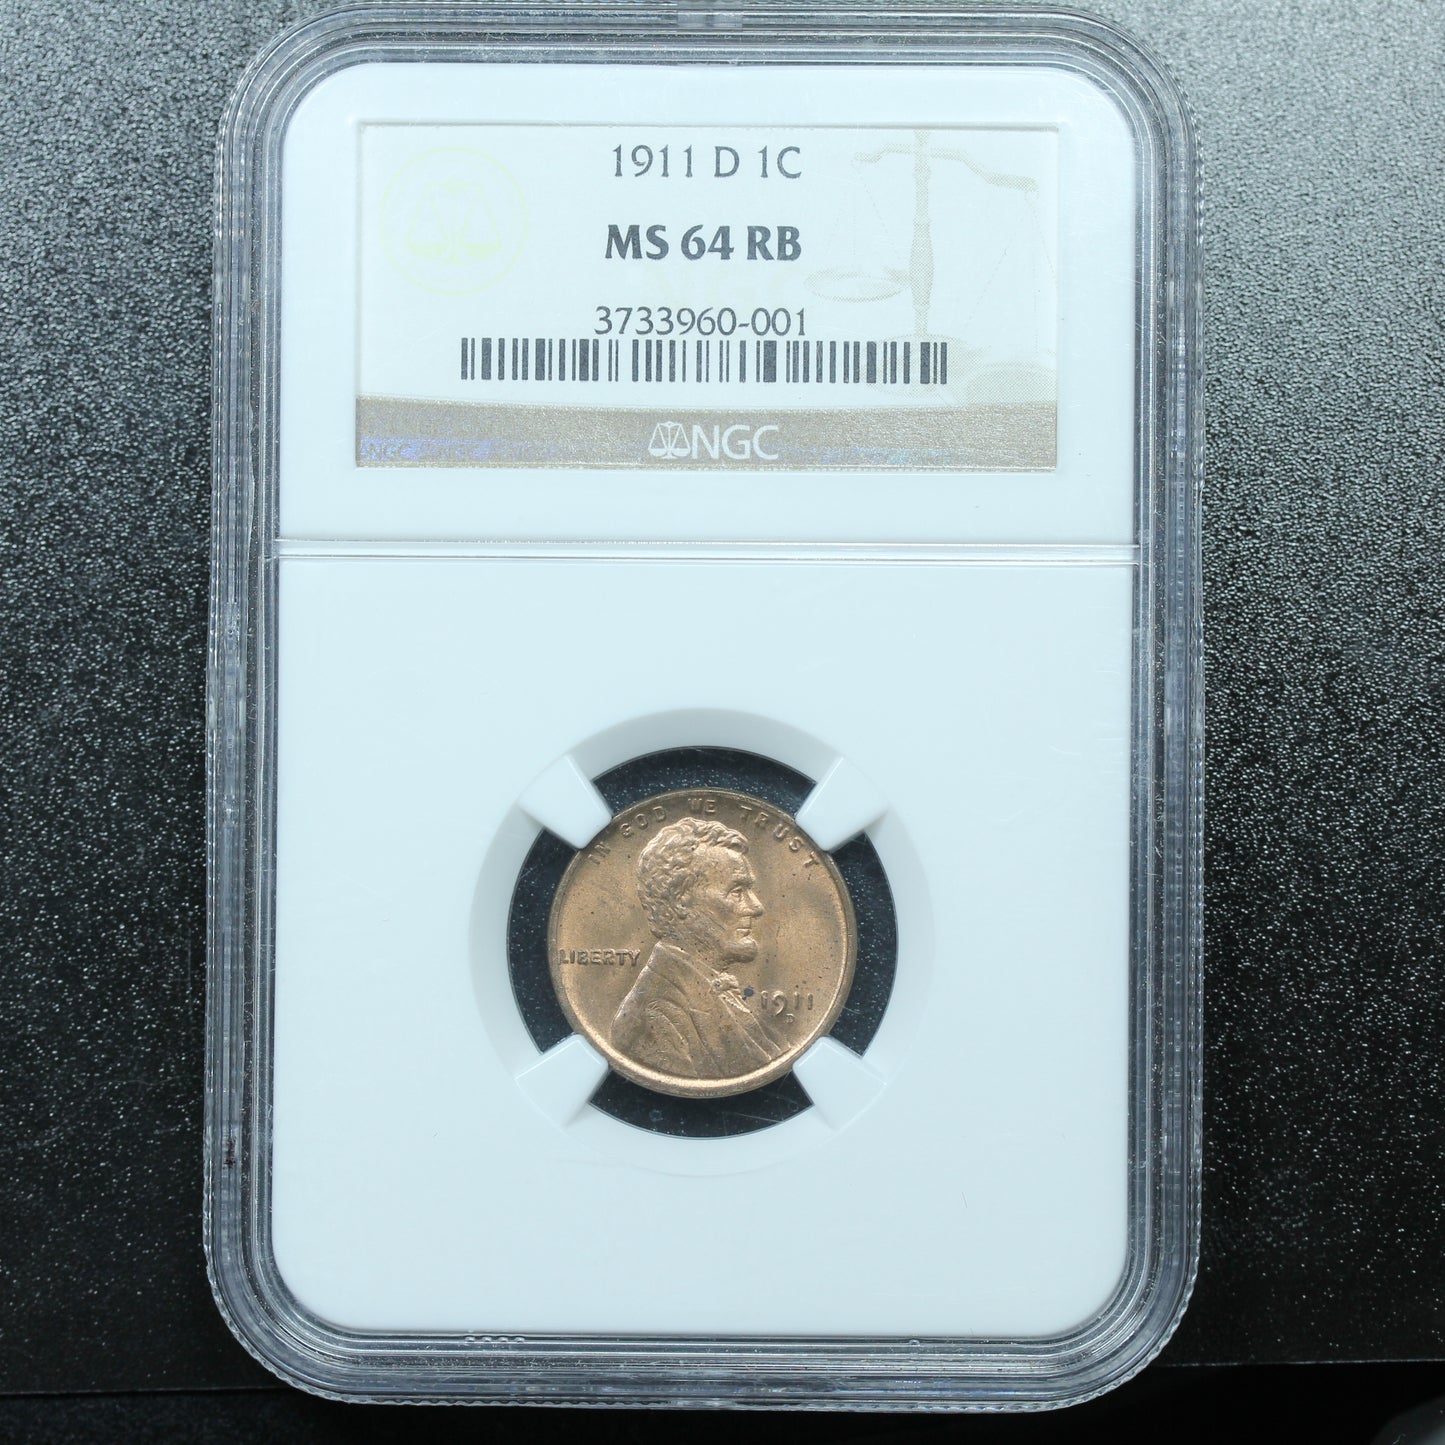 1911 D (Denver) 1C Lincoln Cent Wheat Penny - NGC MS 64 RB